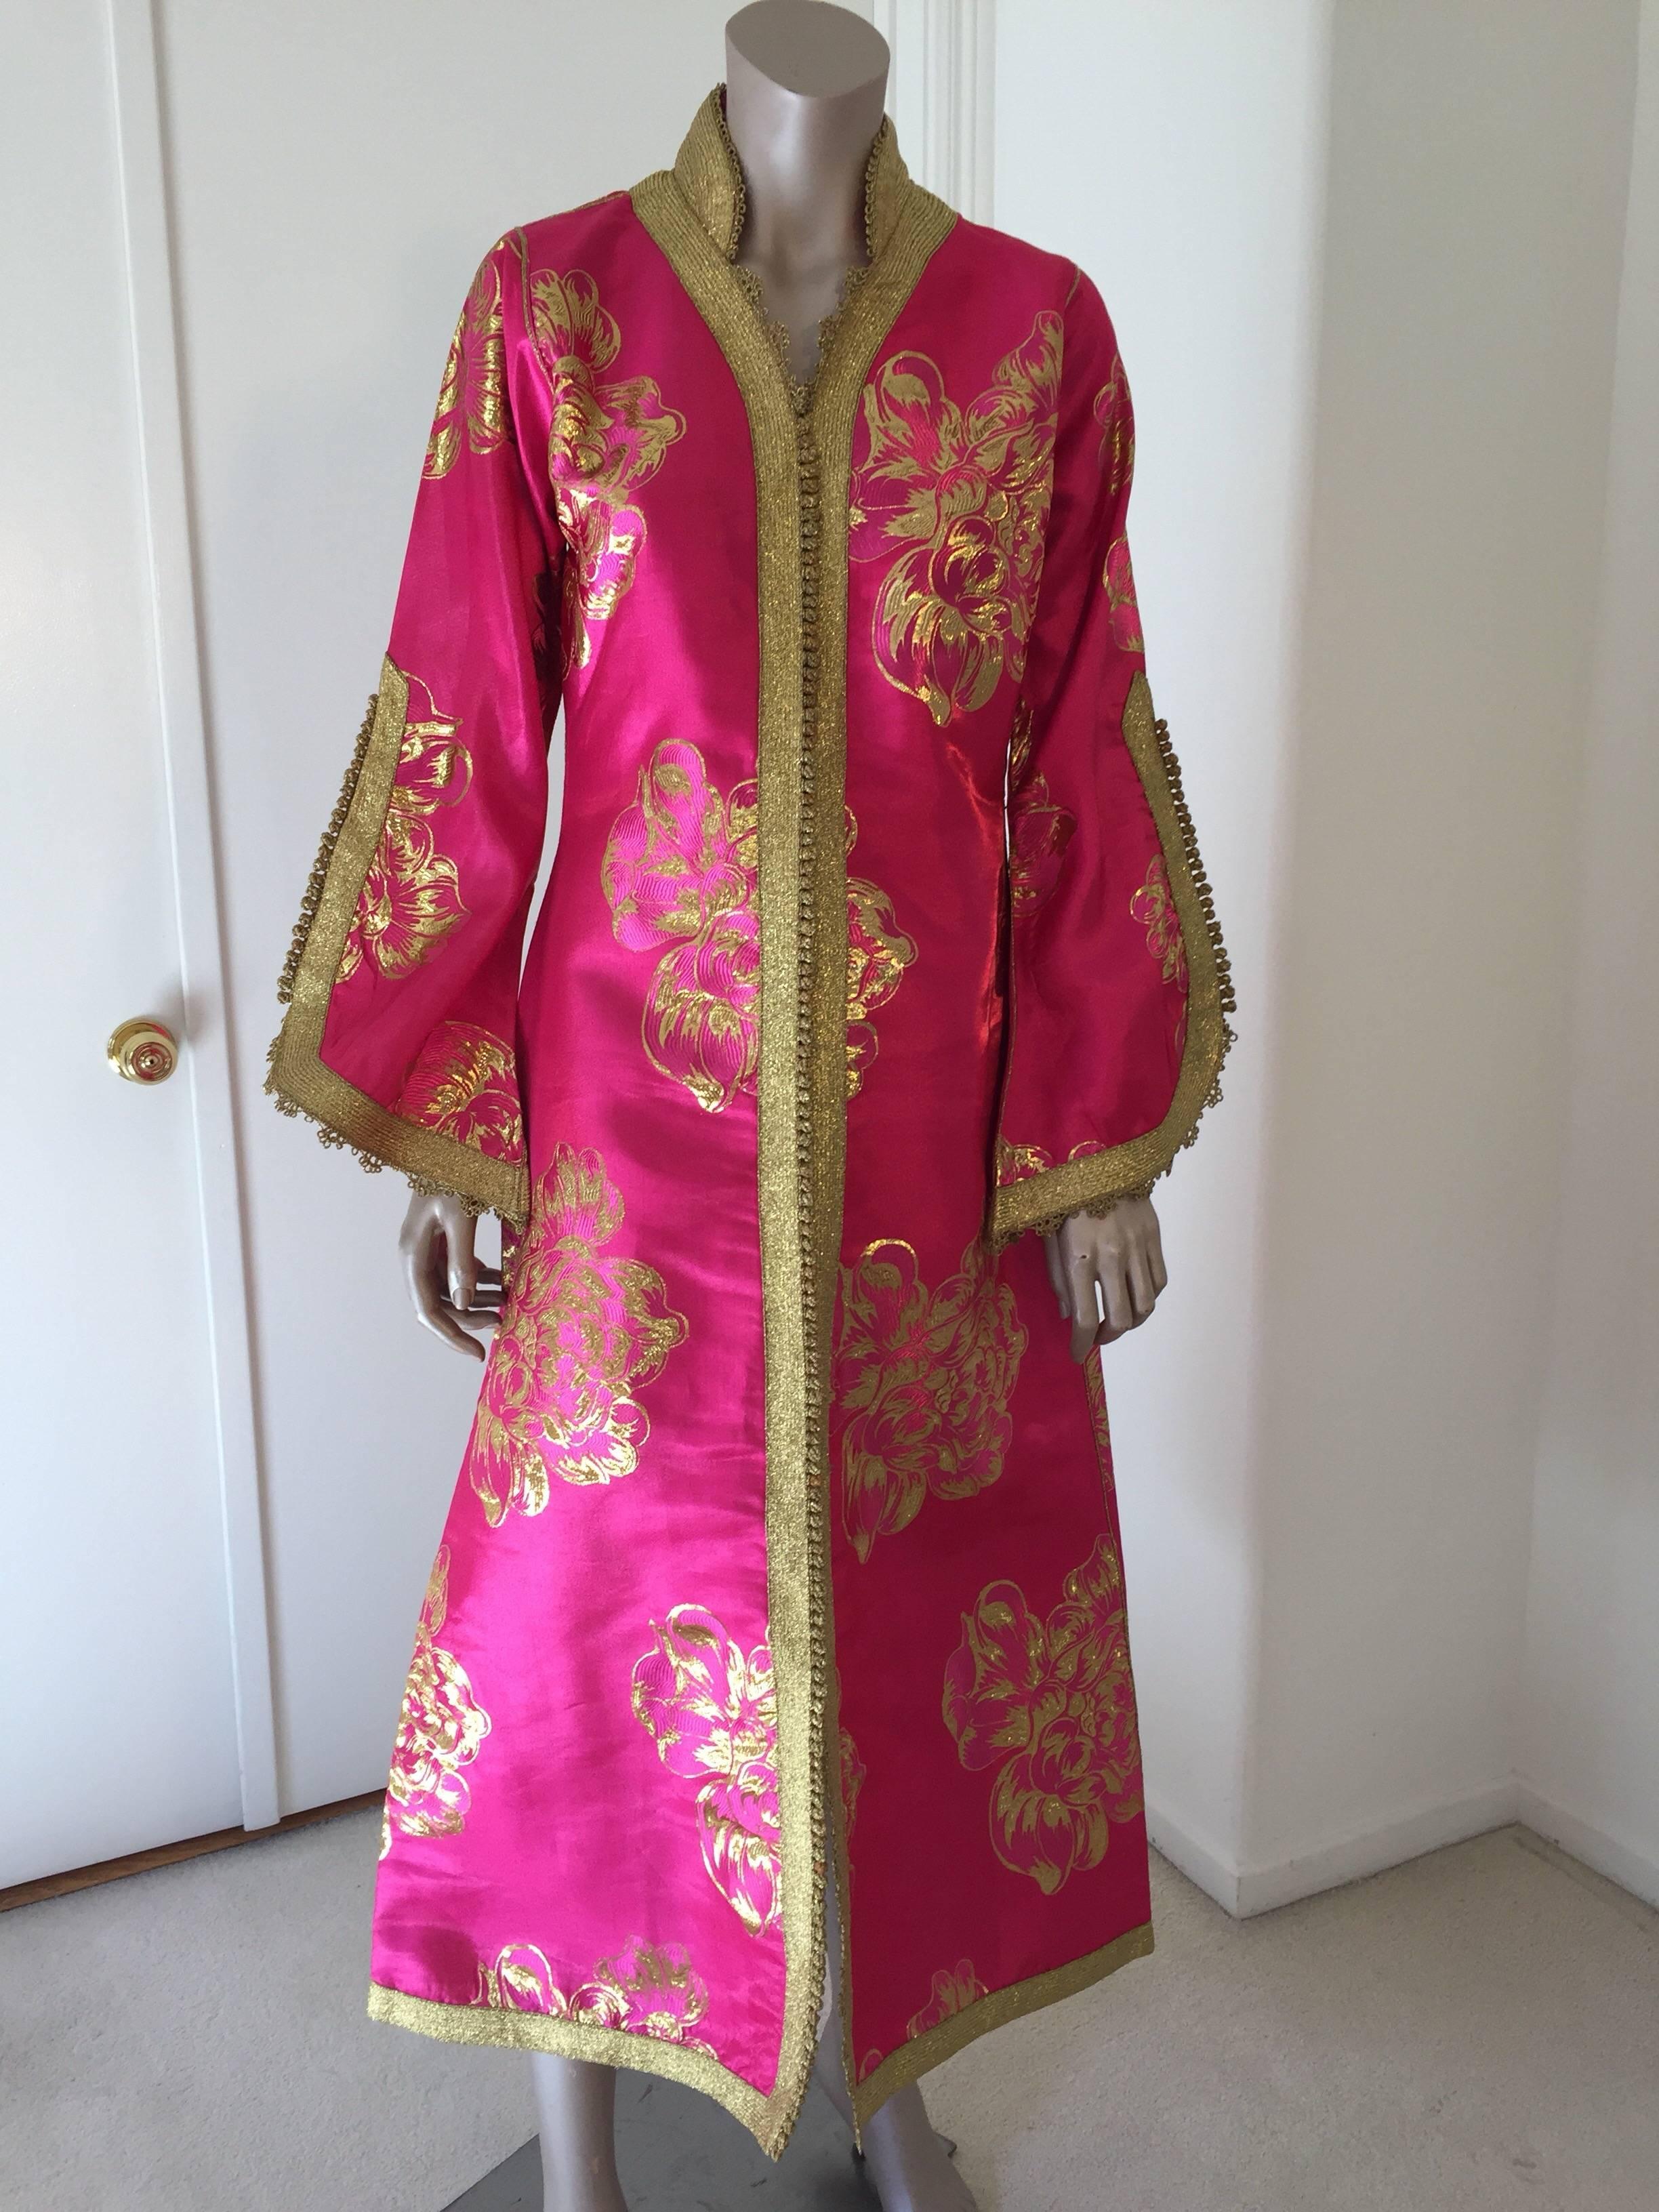 20th Century Vintage Designer Moroccan Kaftan, Embroidered Brocade Caftan with Pink and Gold